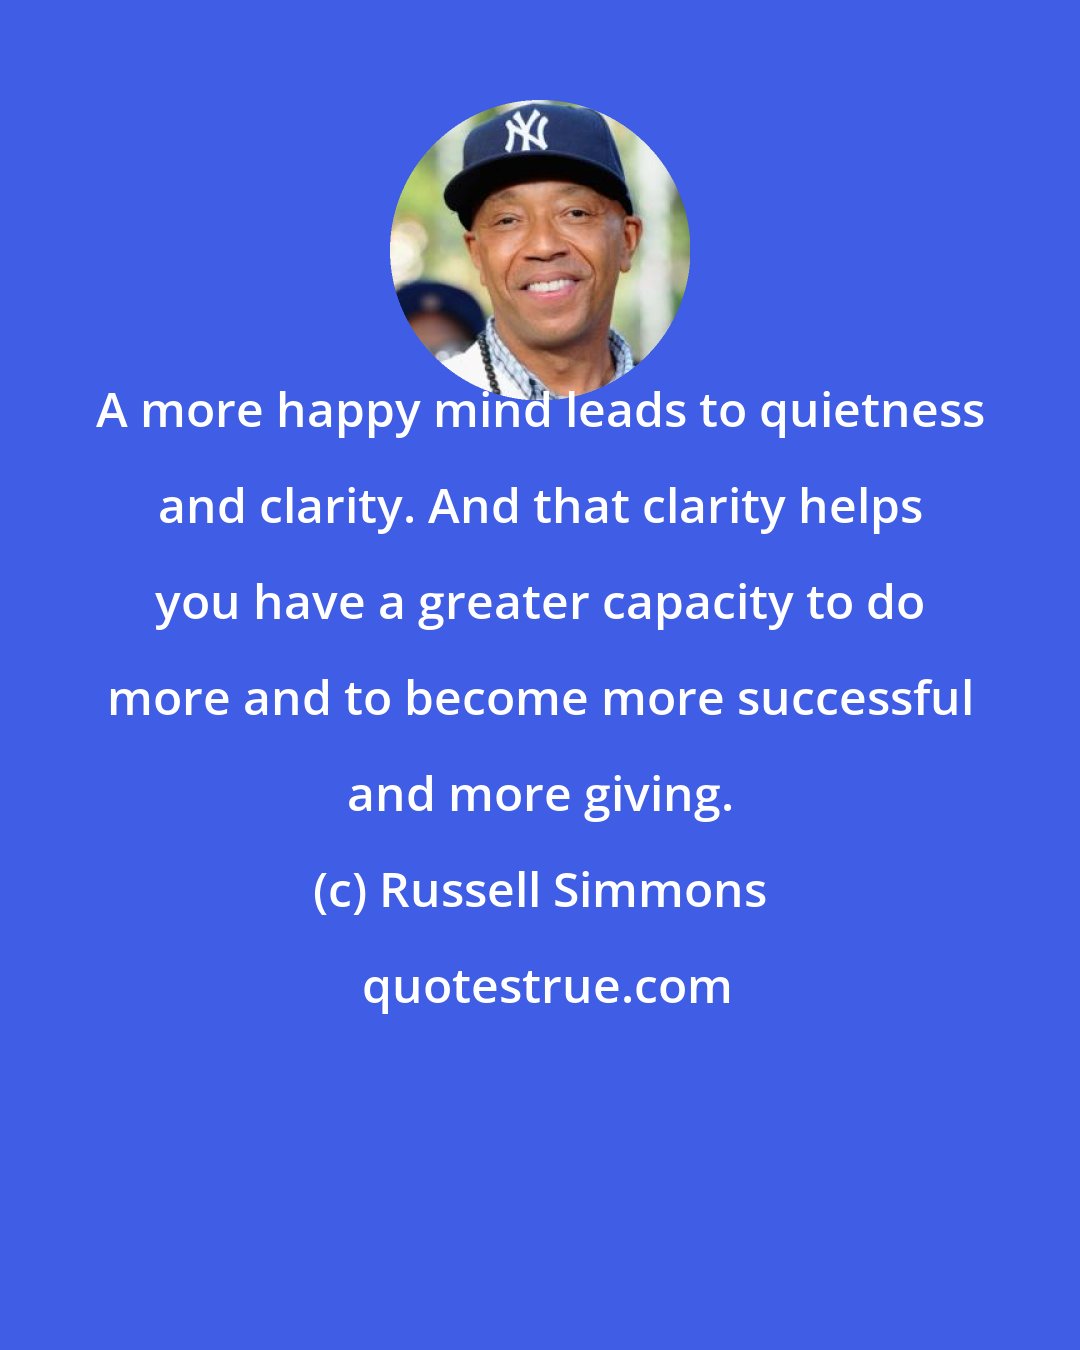 Russell Simmons: A more happy mind leads to quietness and clarity. And that clarity helps you have a greater capacity to do more and to become more successful and more giving.